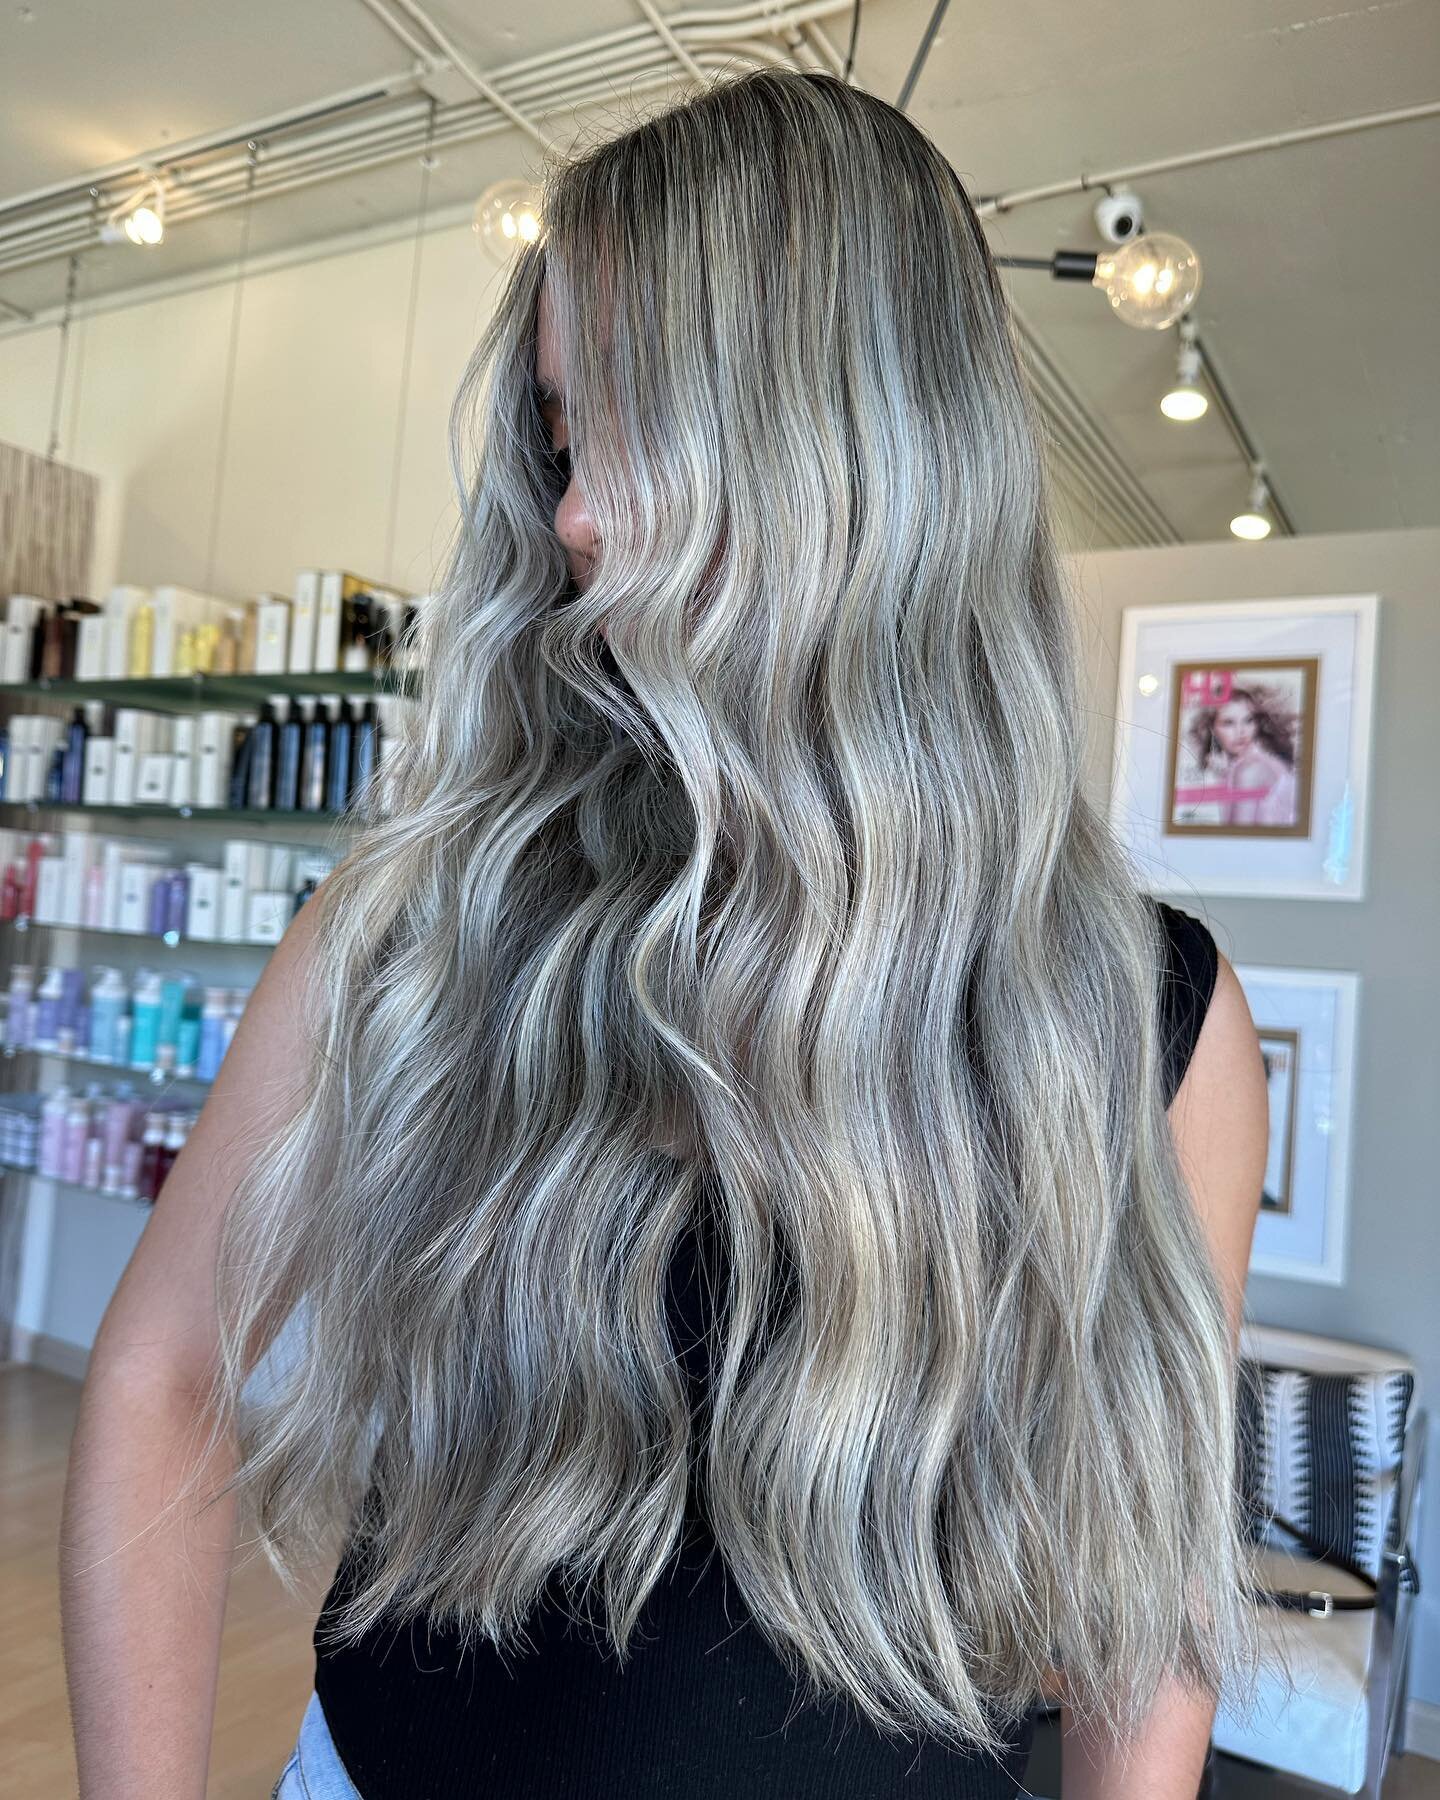 White blonde 
&bull;
&bull;
Done by our stylist @jessicahoover33 
#babylights #highlights 
#balayage #balayagehighlights #balayagehair #balayagedandpainted #dimensionalbalayage #dimensionalcolor #dimensionalblonde #blondebalayage #blondes #Blondeshav